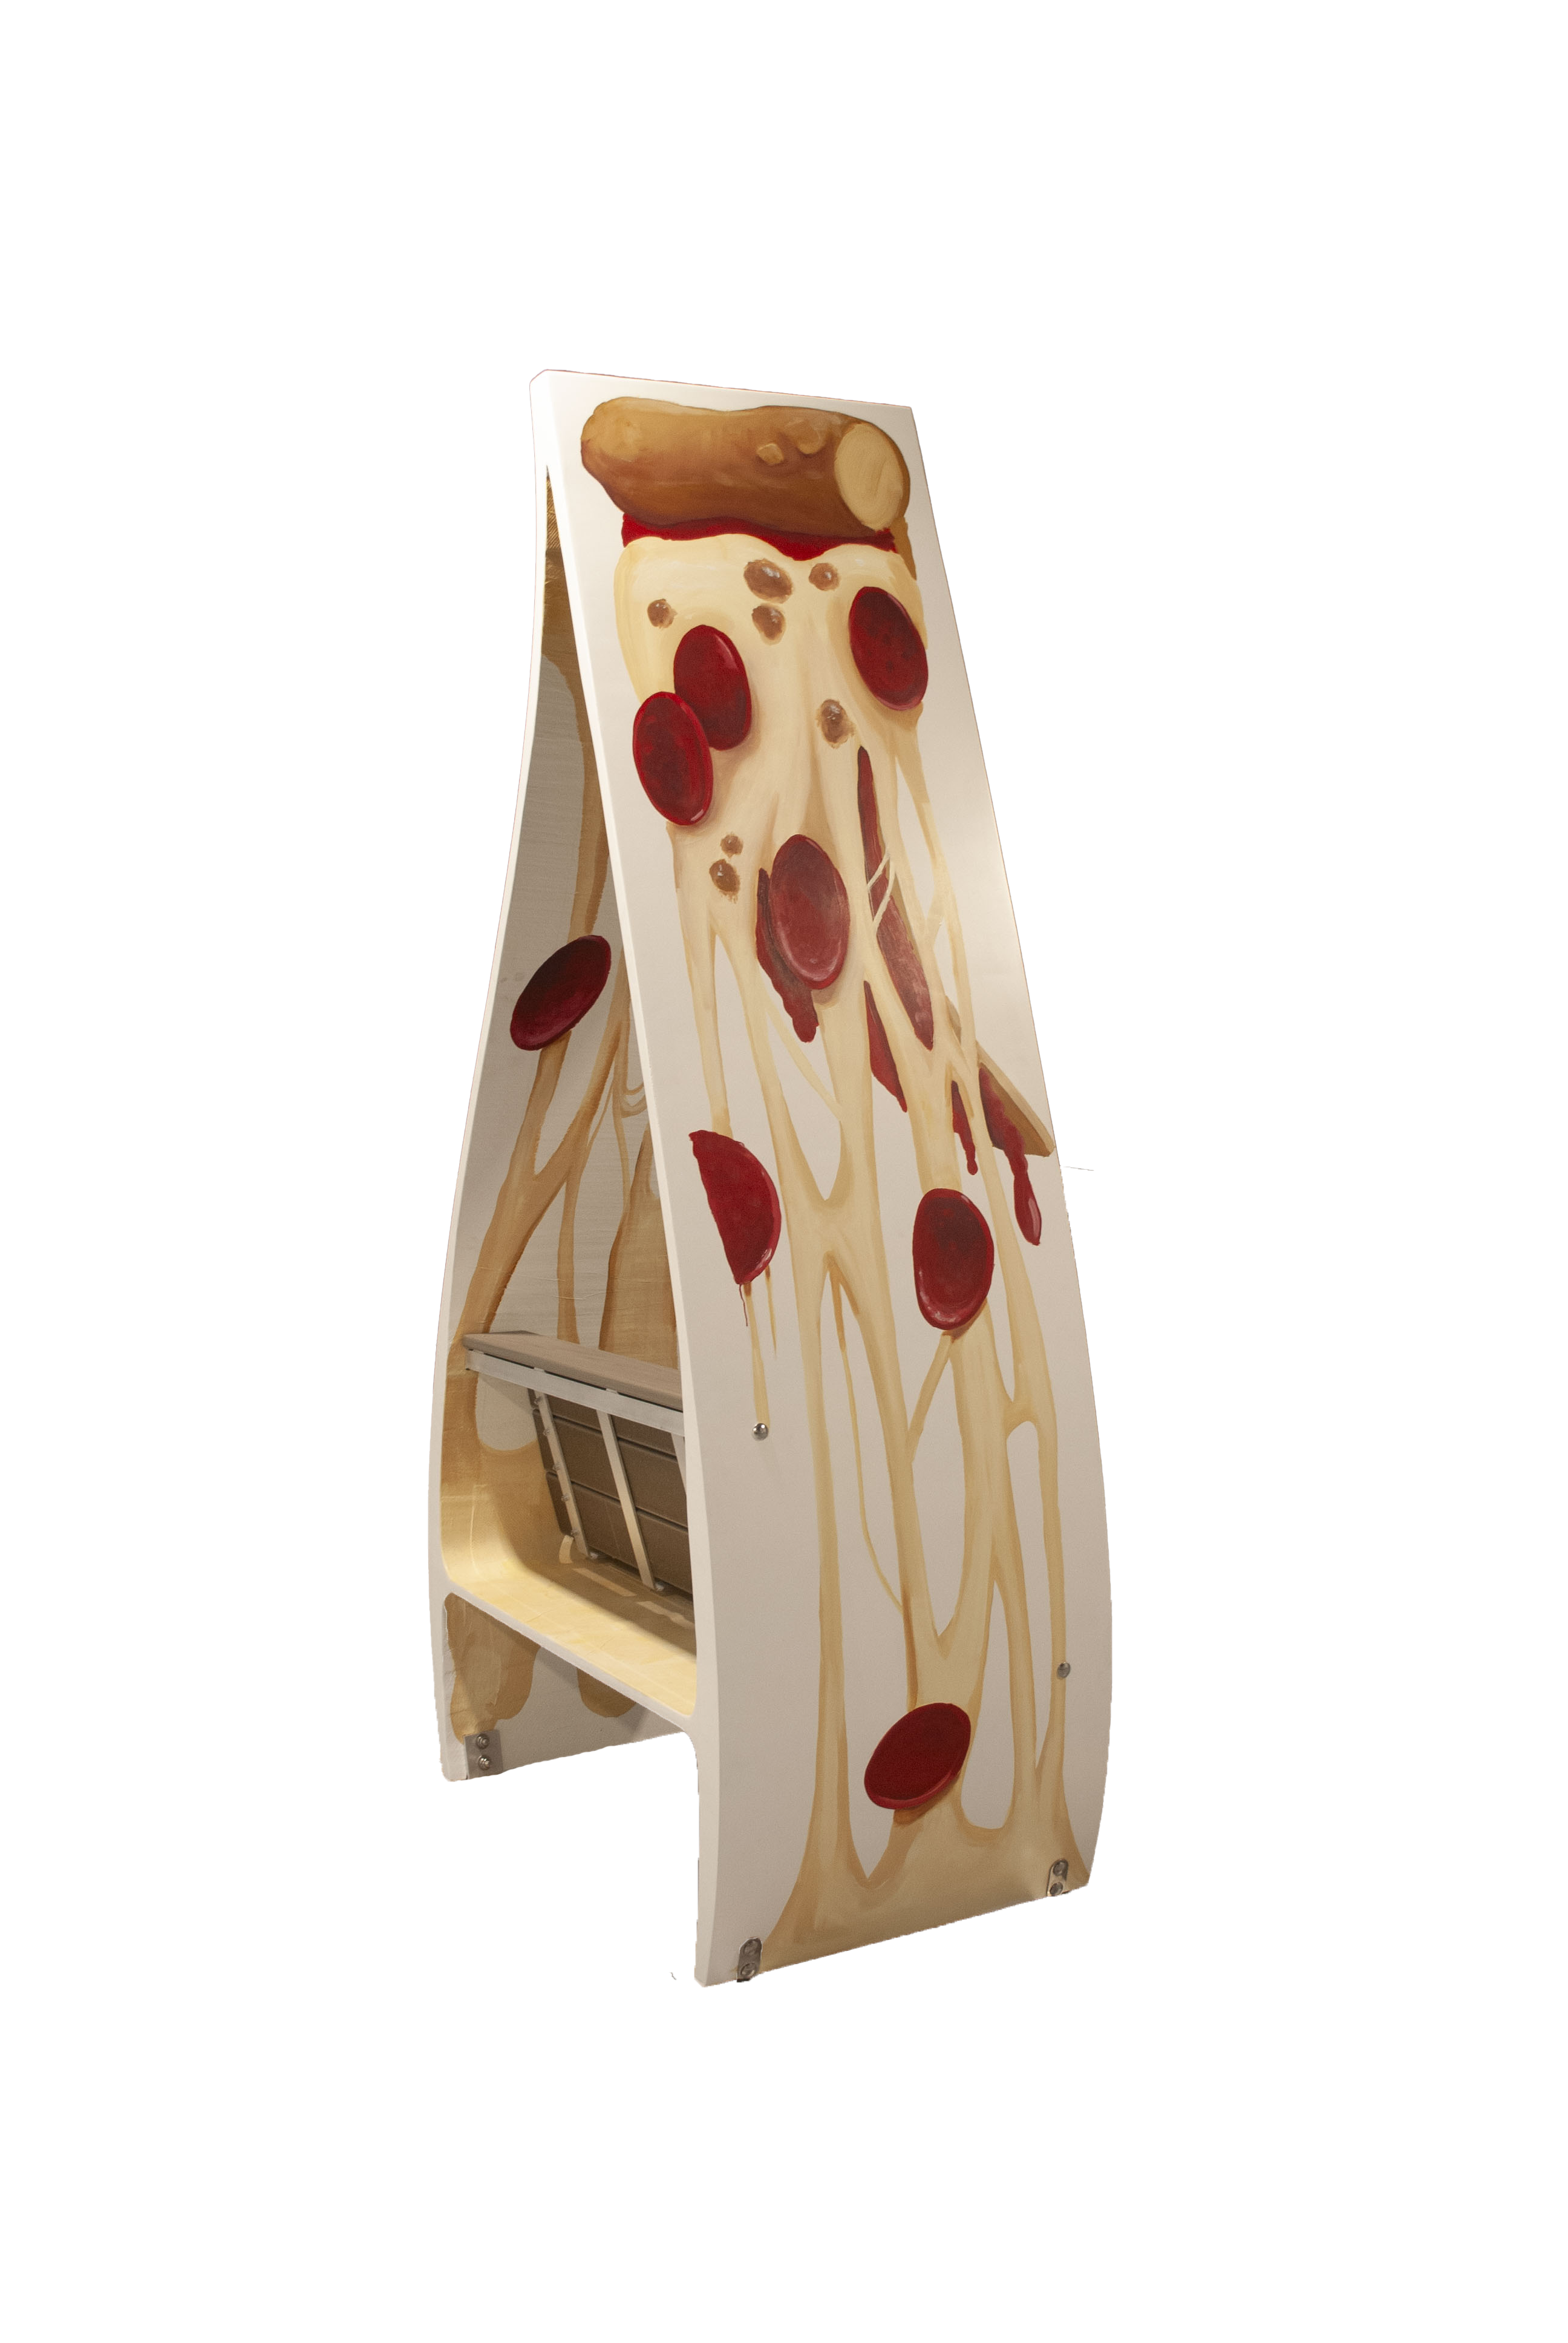 Pizza Bench